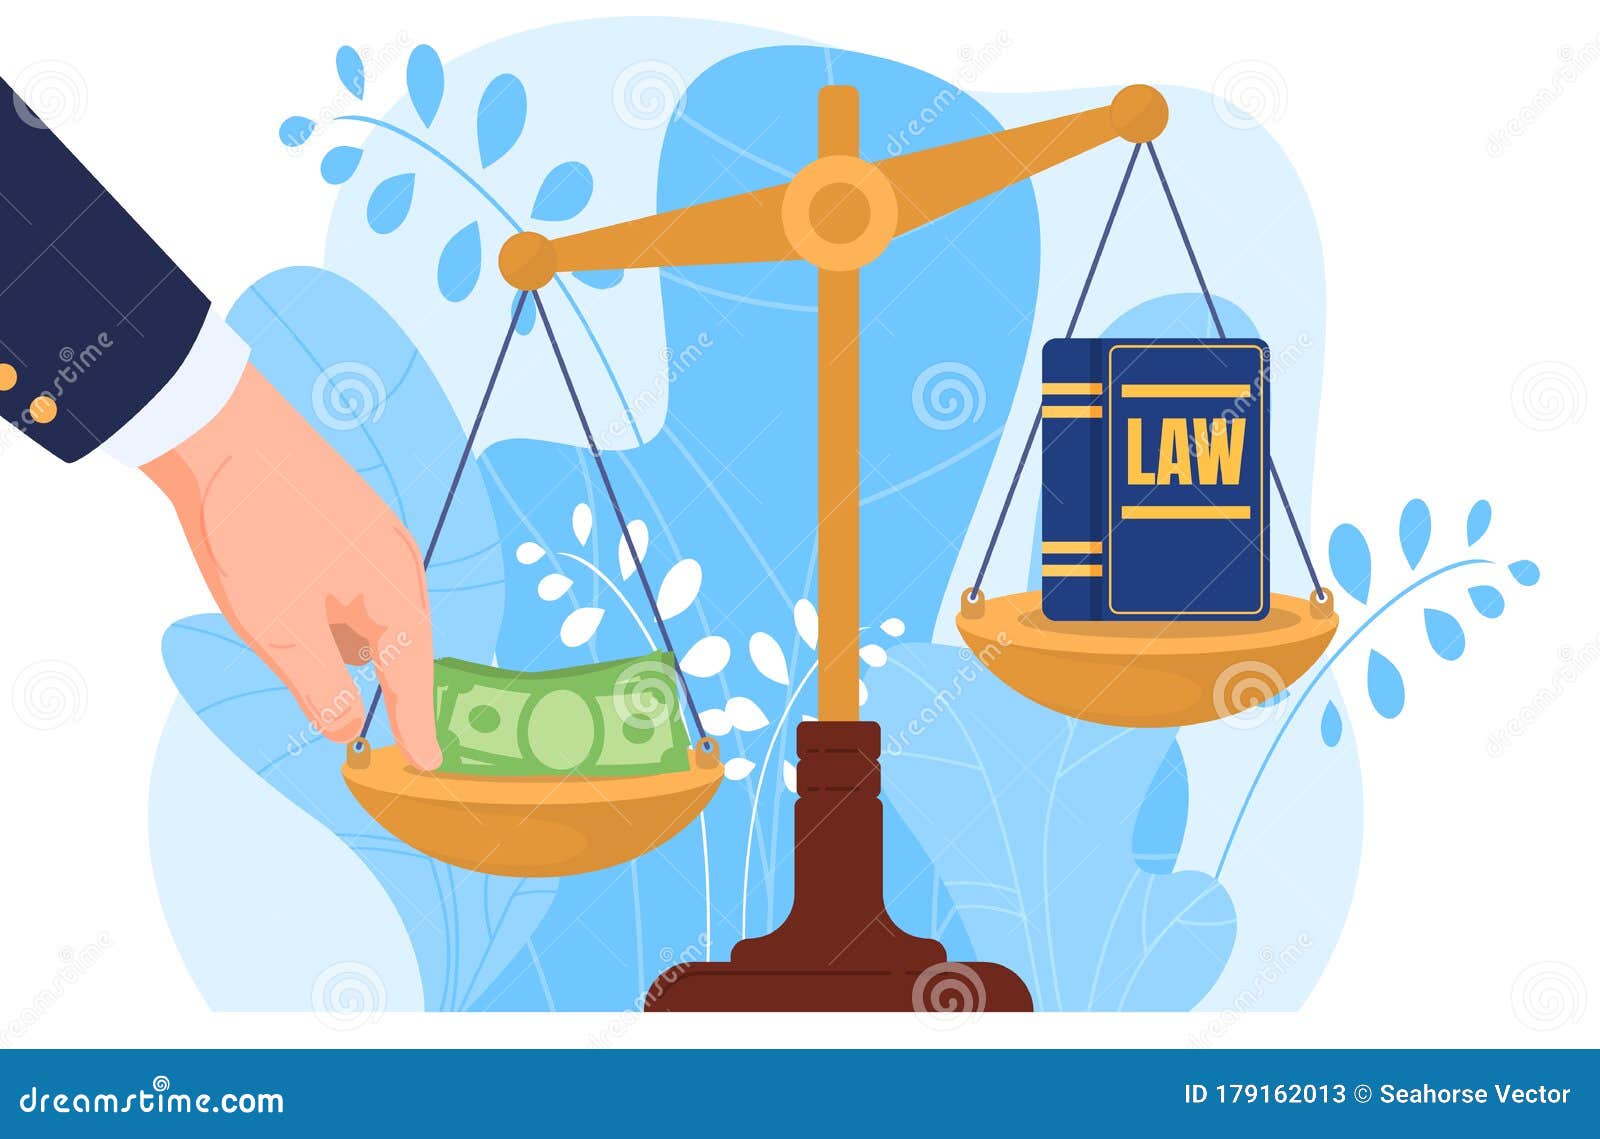 corruption-hand-put-money-scale-bribery-isolated-white-flat-vector-illustration-corrupt-practices-legal-corruption-hand-179162013.jpg